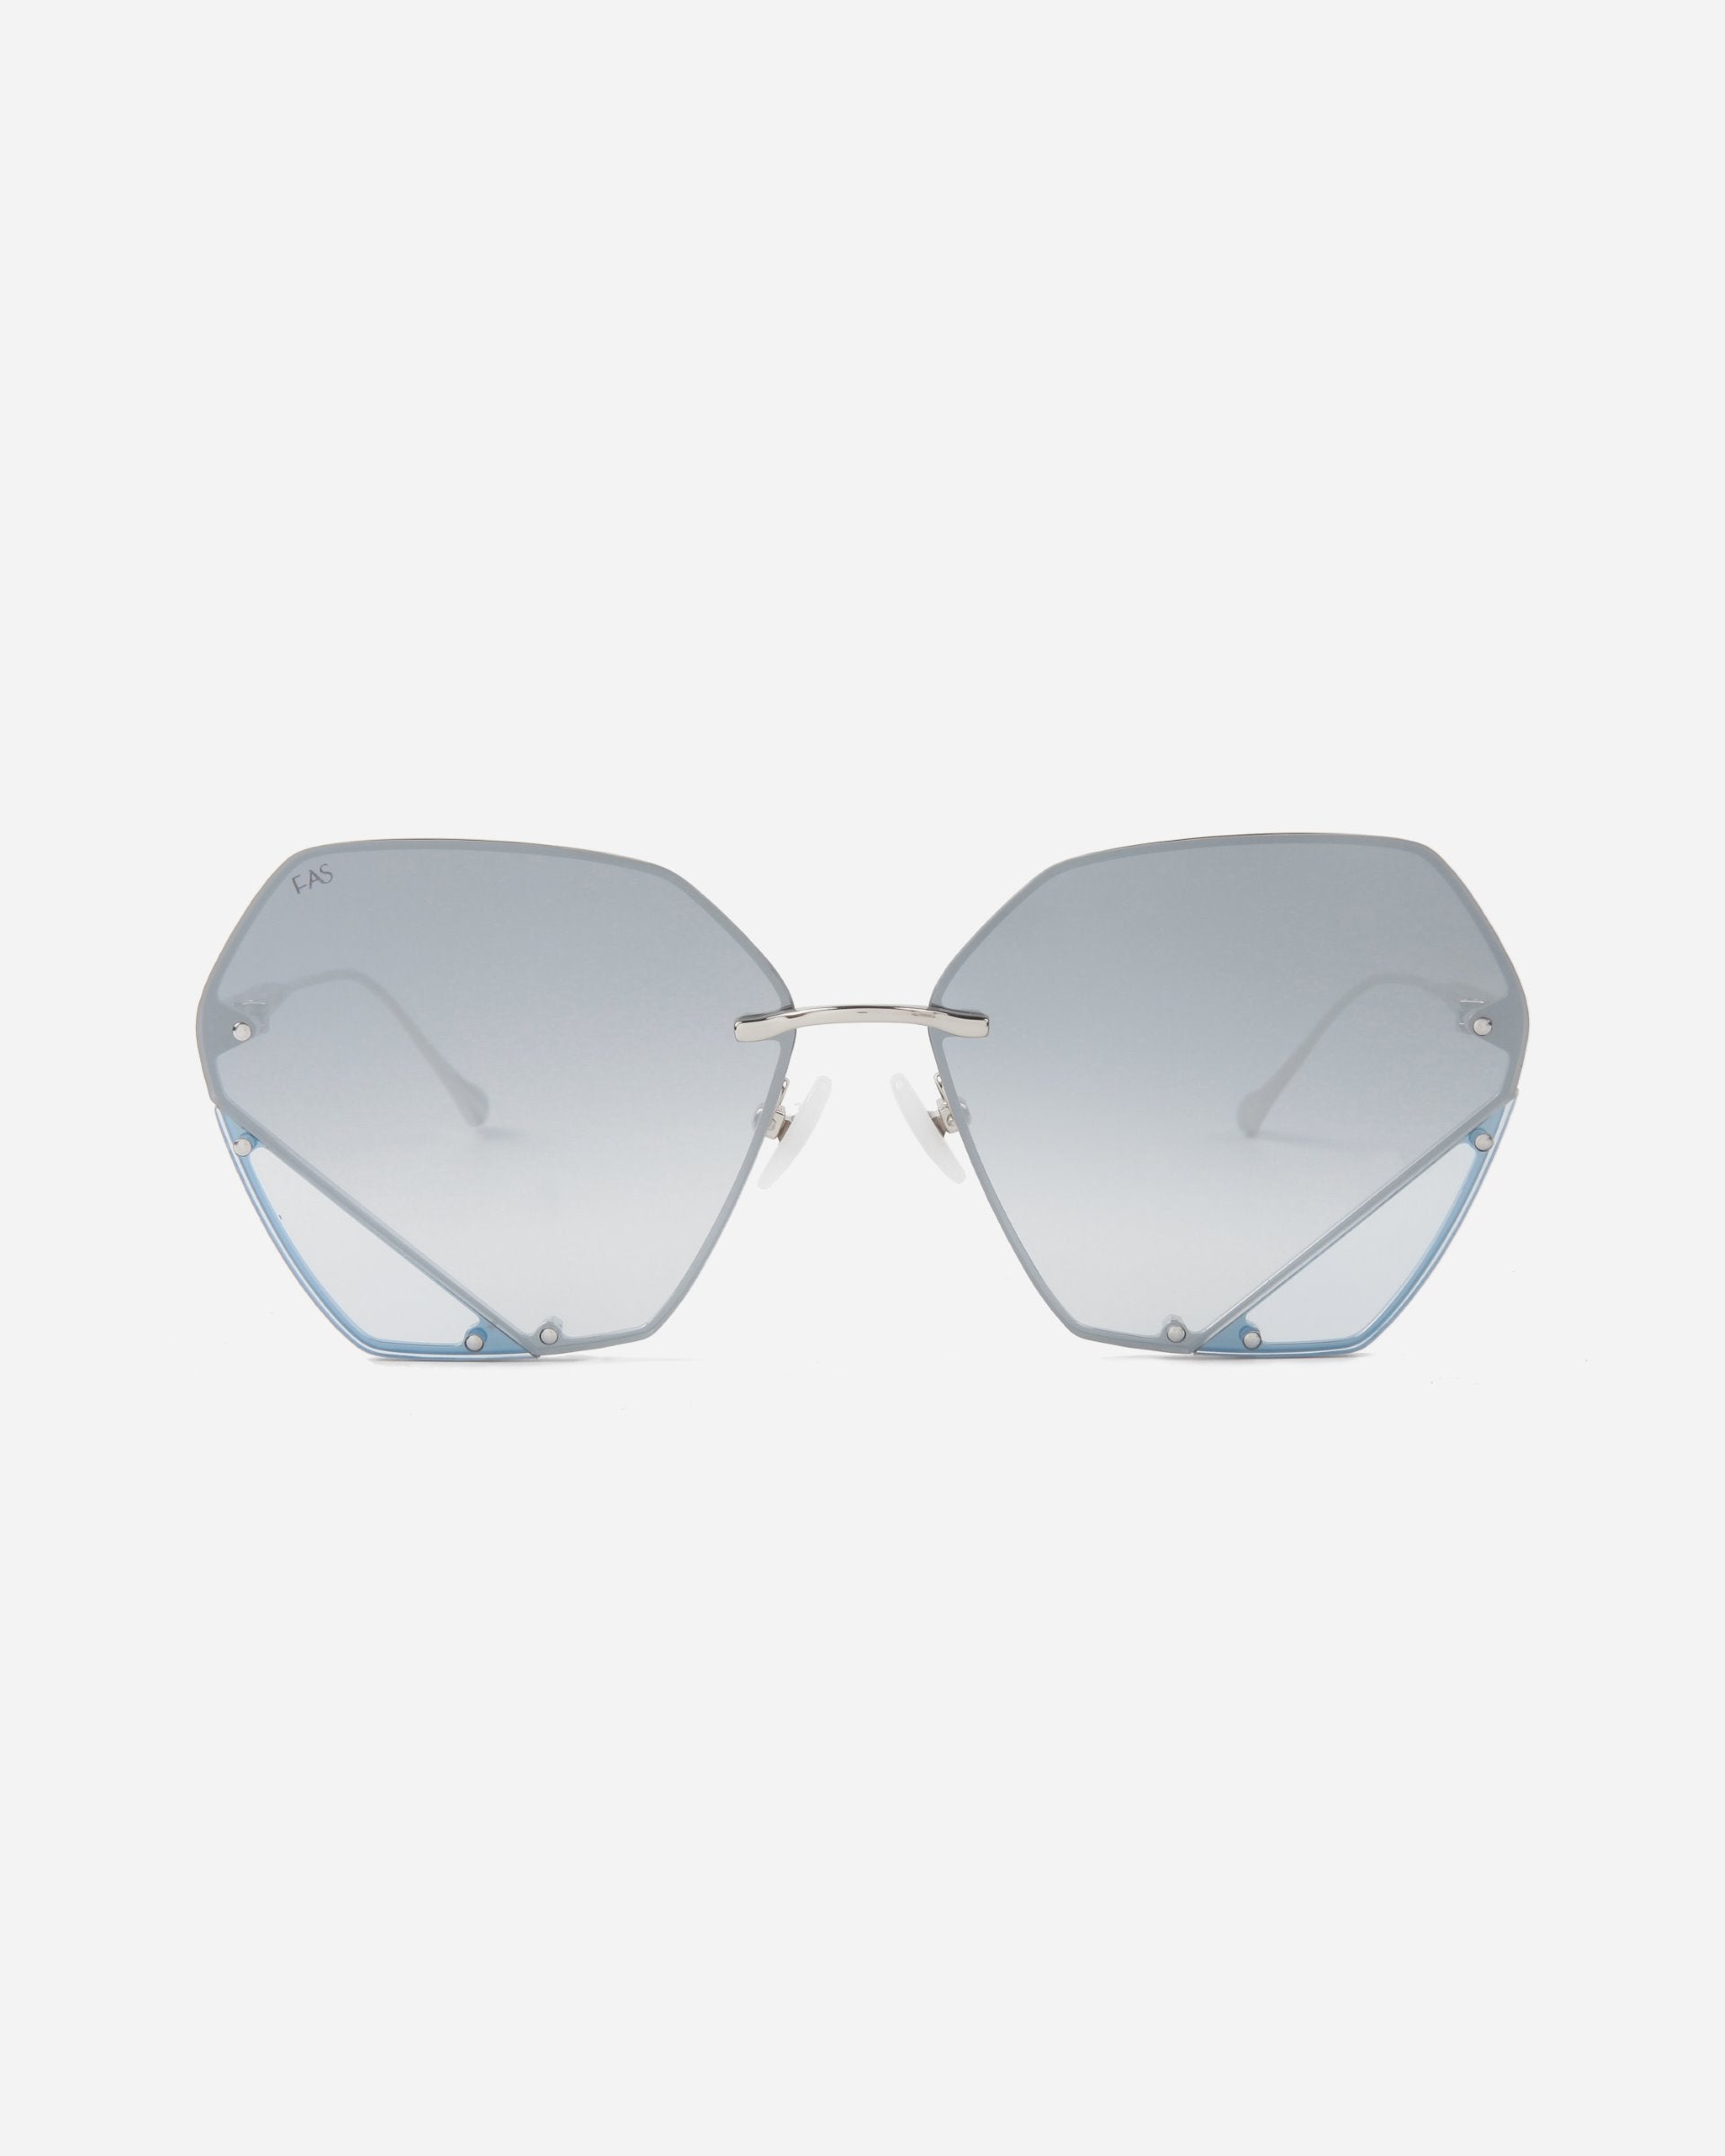 Hexagon-shaped Icy sunglasses with blue tinted lenses and sleek metal frames by For Art's Sake® on a white background. The design is minimalist with light blue accents at the bottom corners of the geometric lenses, jadestone nosepads, and UV protection.